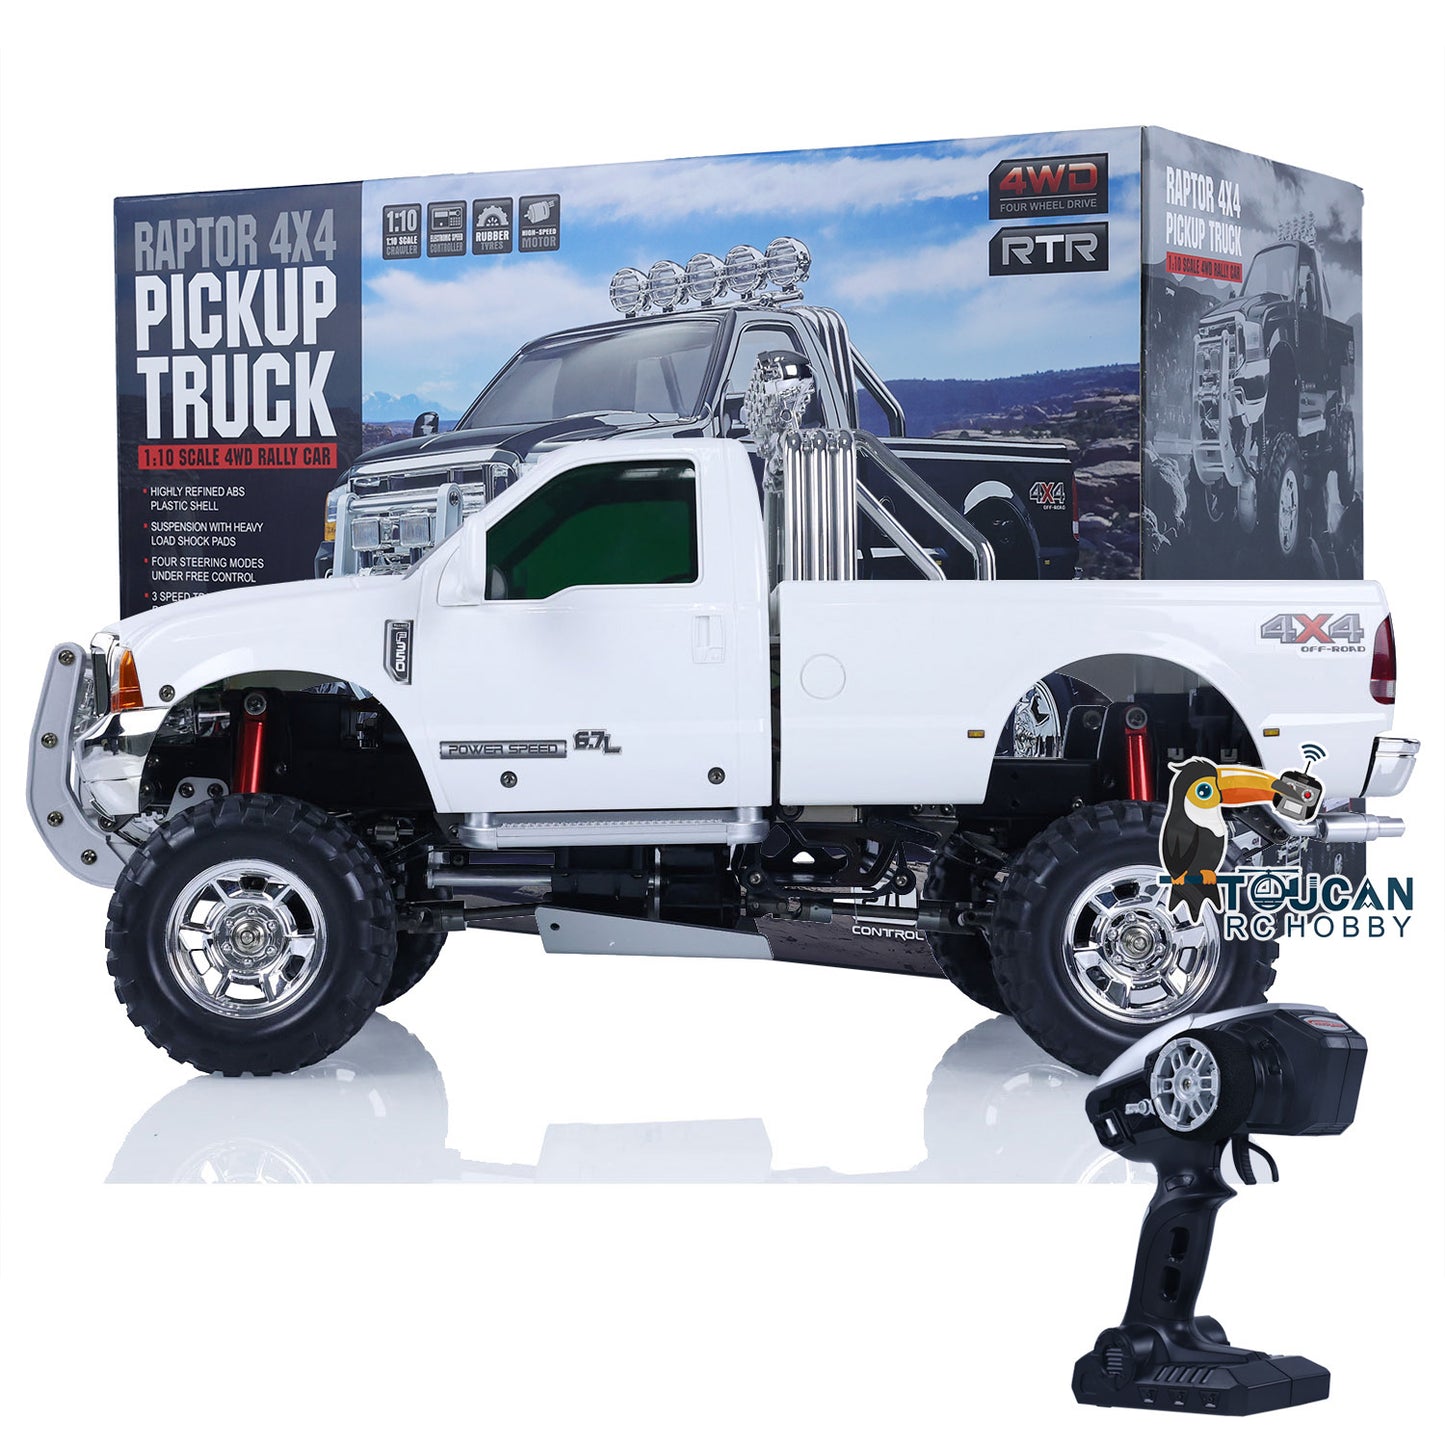 US STOCK HG 1/10 RC Pickup Truck Model P410 4*4 Rally Car Racing Crawler 2.4Ghz Bag Radio System Gift for Adults Children